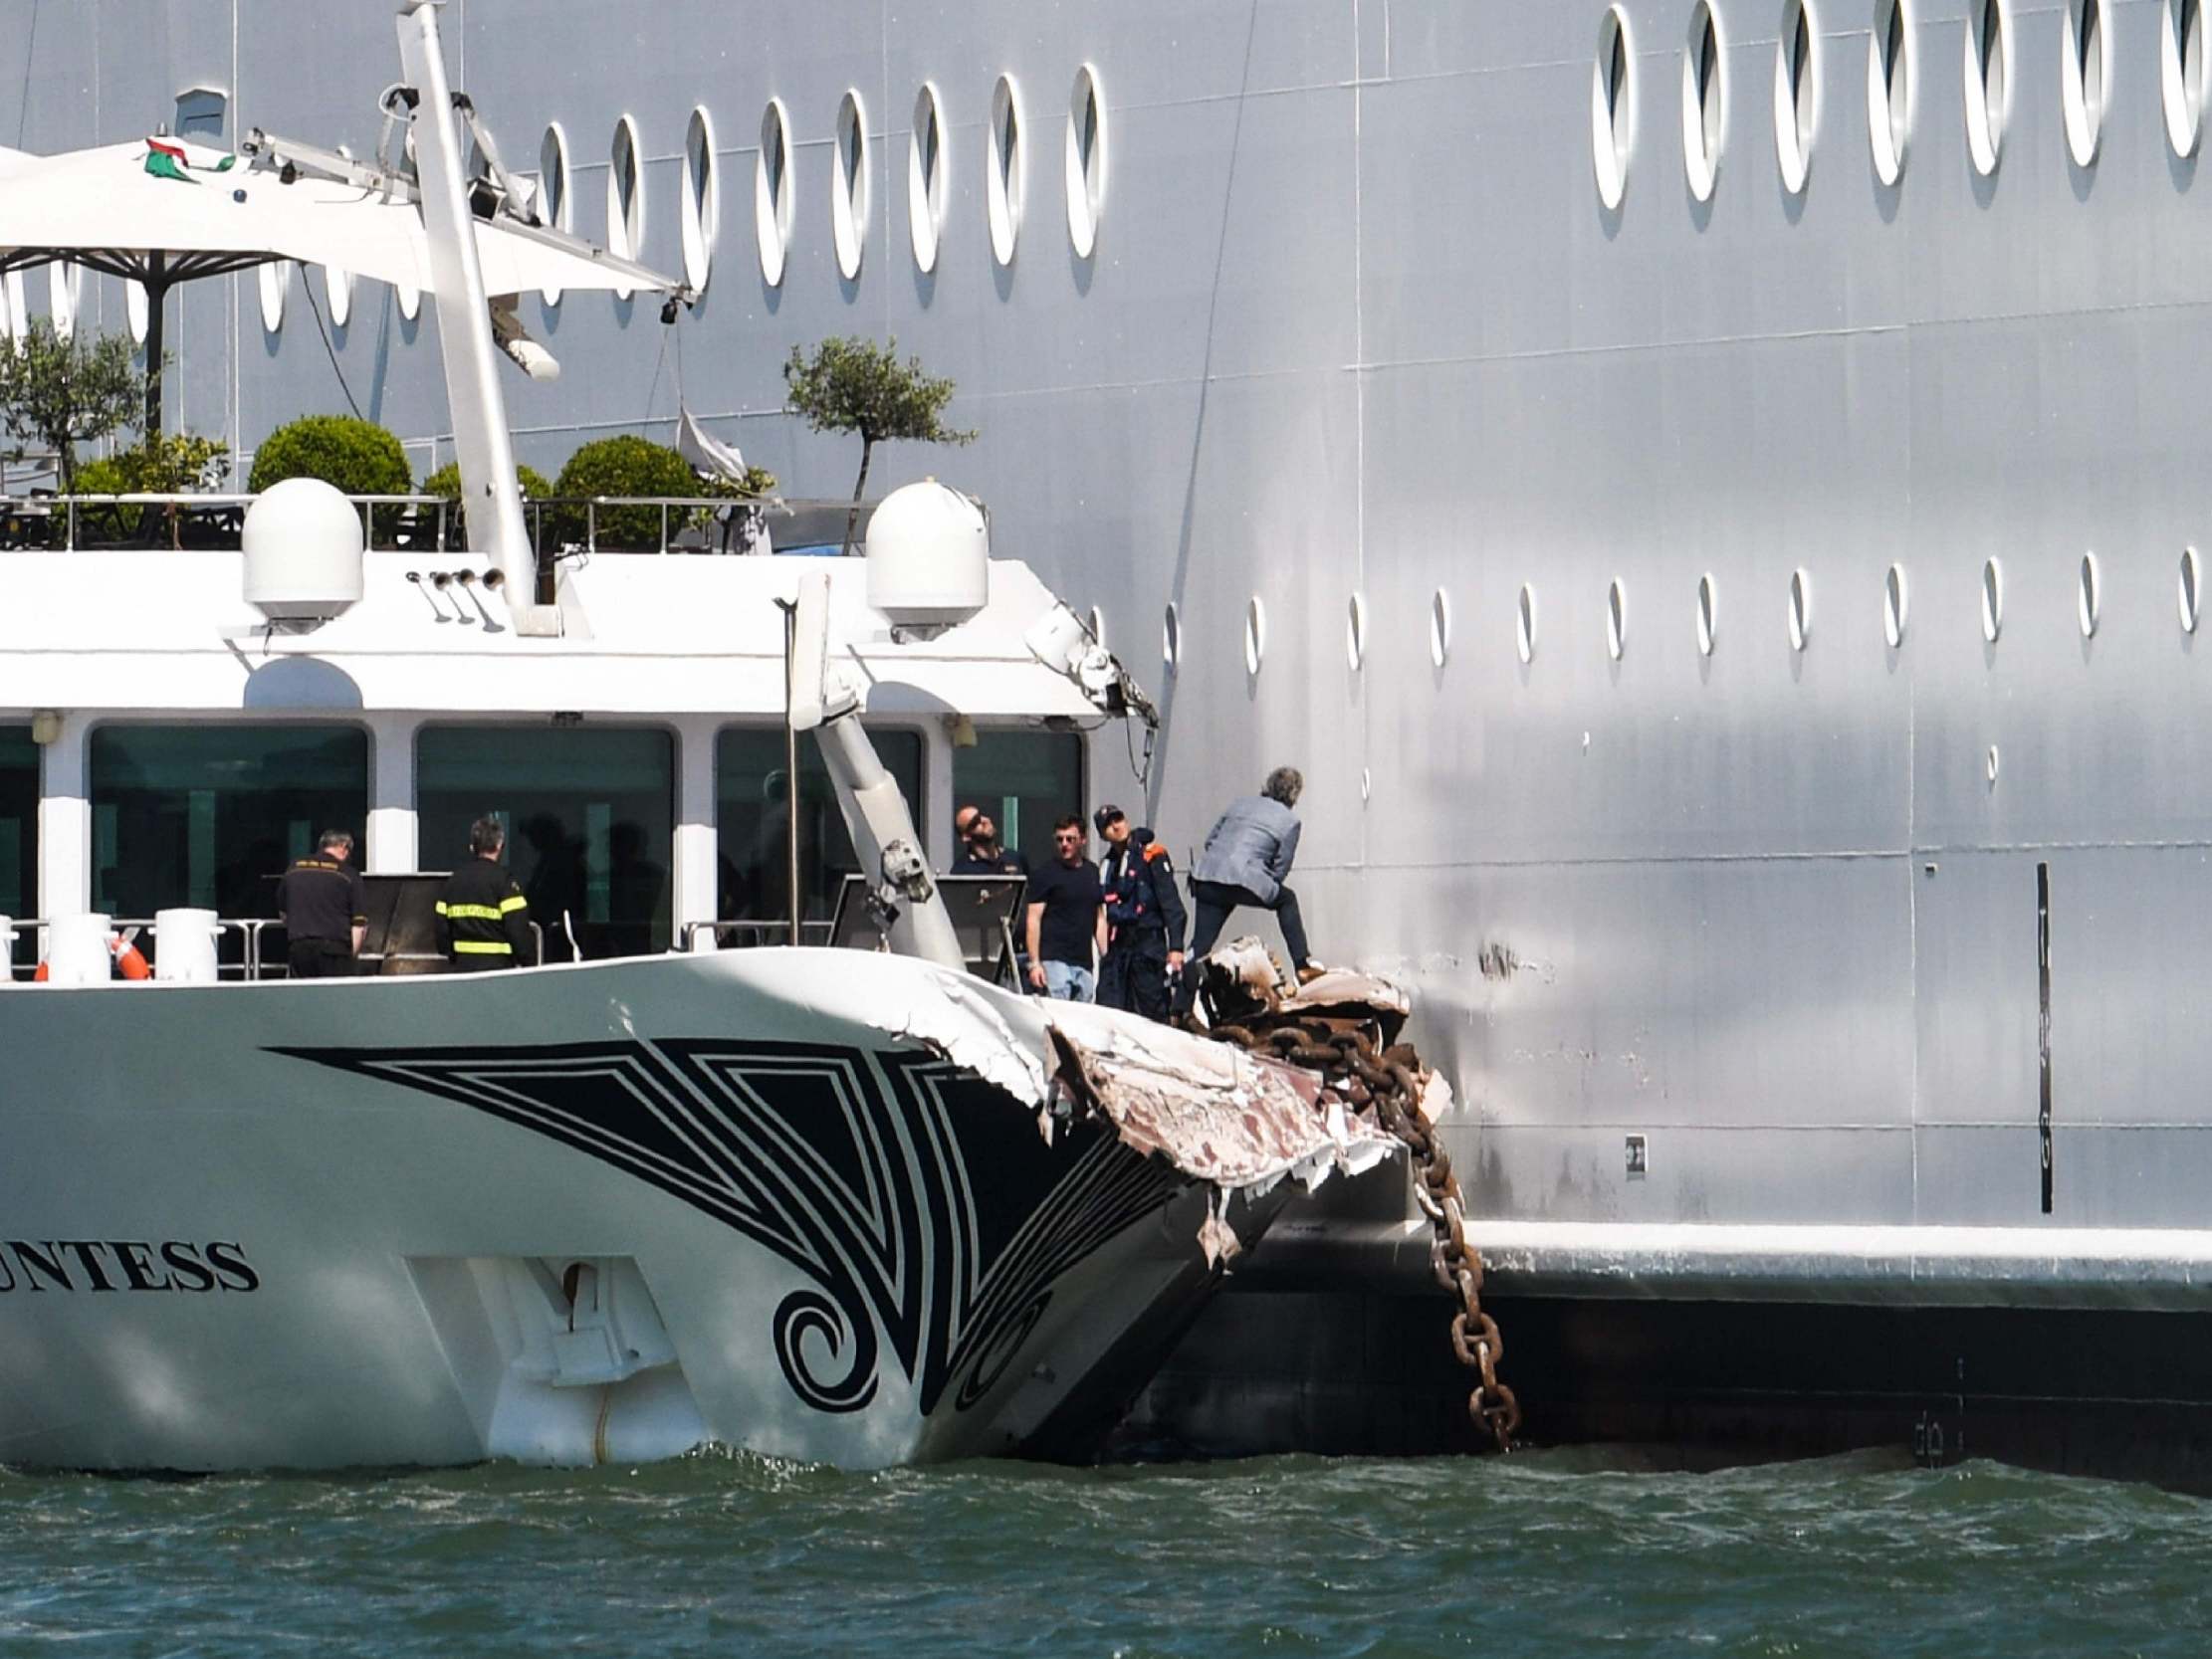 The MSC cruise crash was the final straw for residents